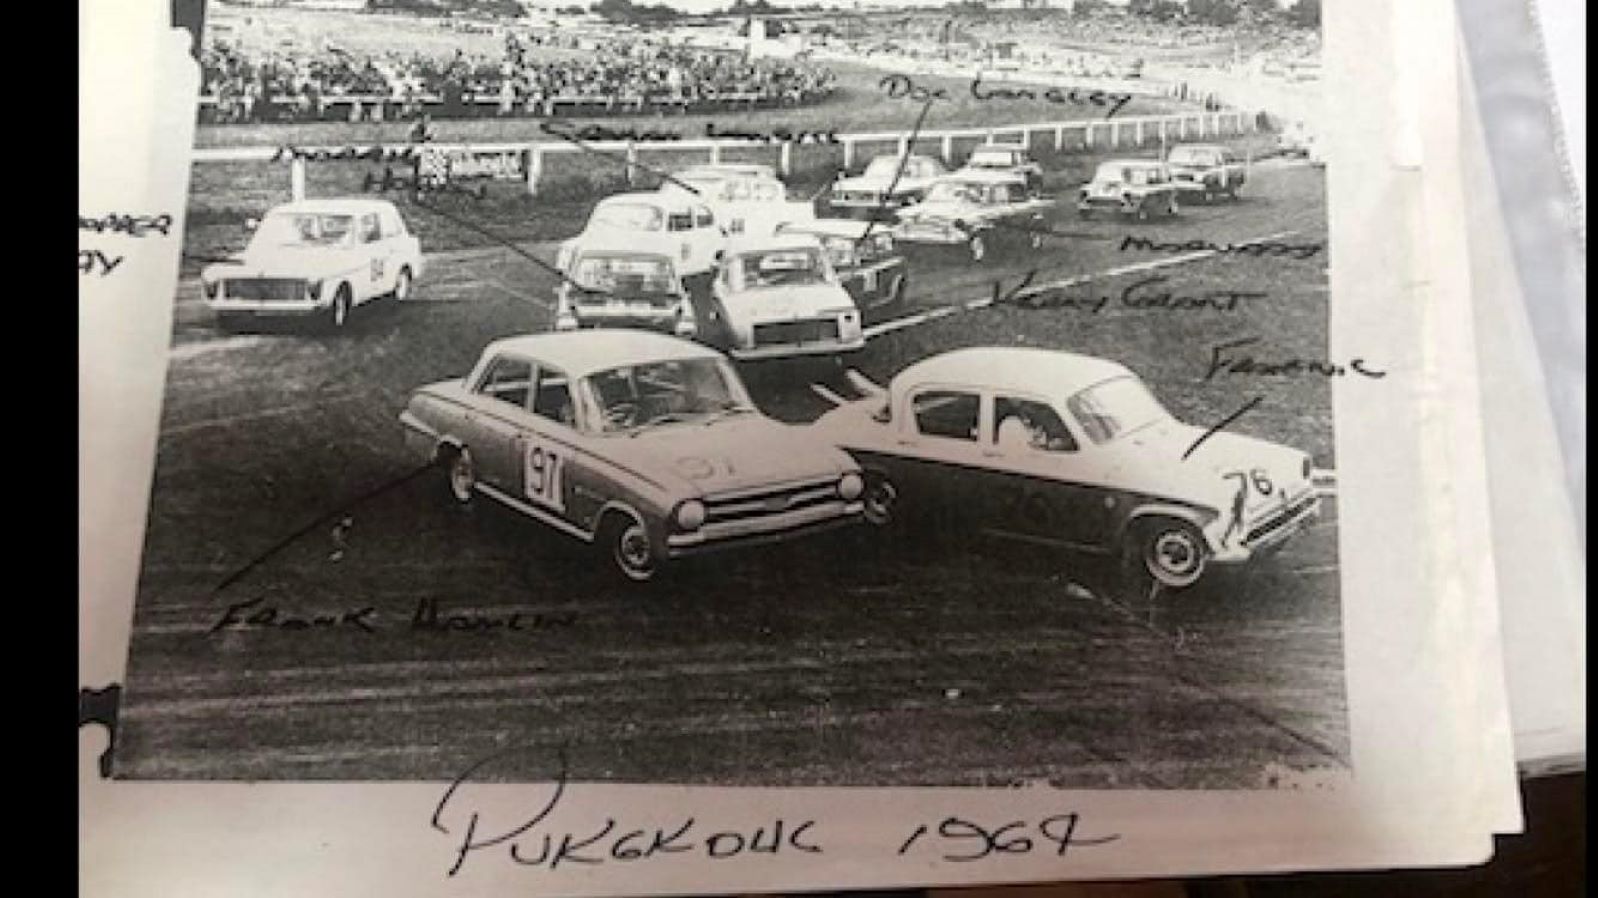 Name:  Pukekohe 1964 #022 1964 Saloon Car field at the Elbow - GP meeting Q 172 kb arch HVRA Bruce Dyer.jpg
Views: 383
Size:  172.4 KB